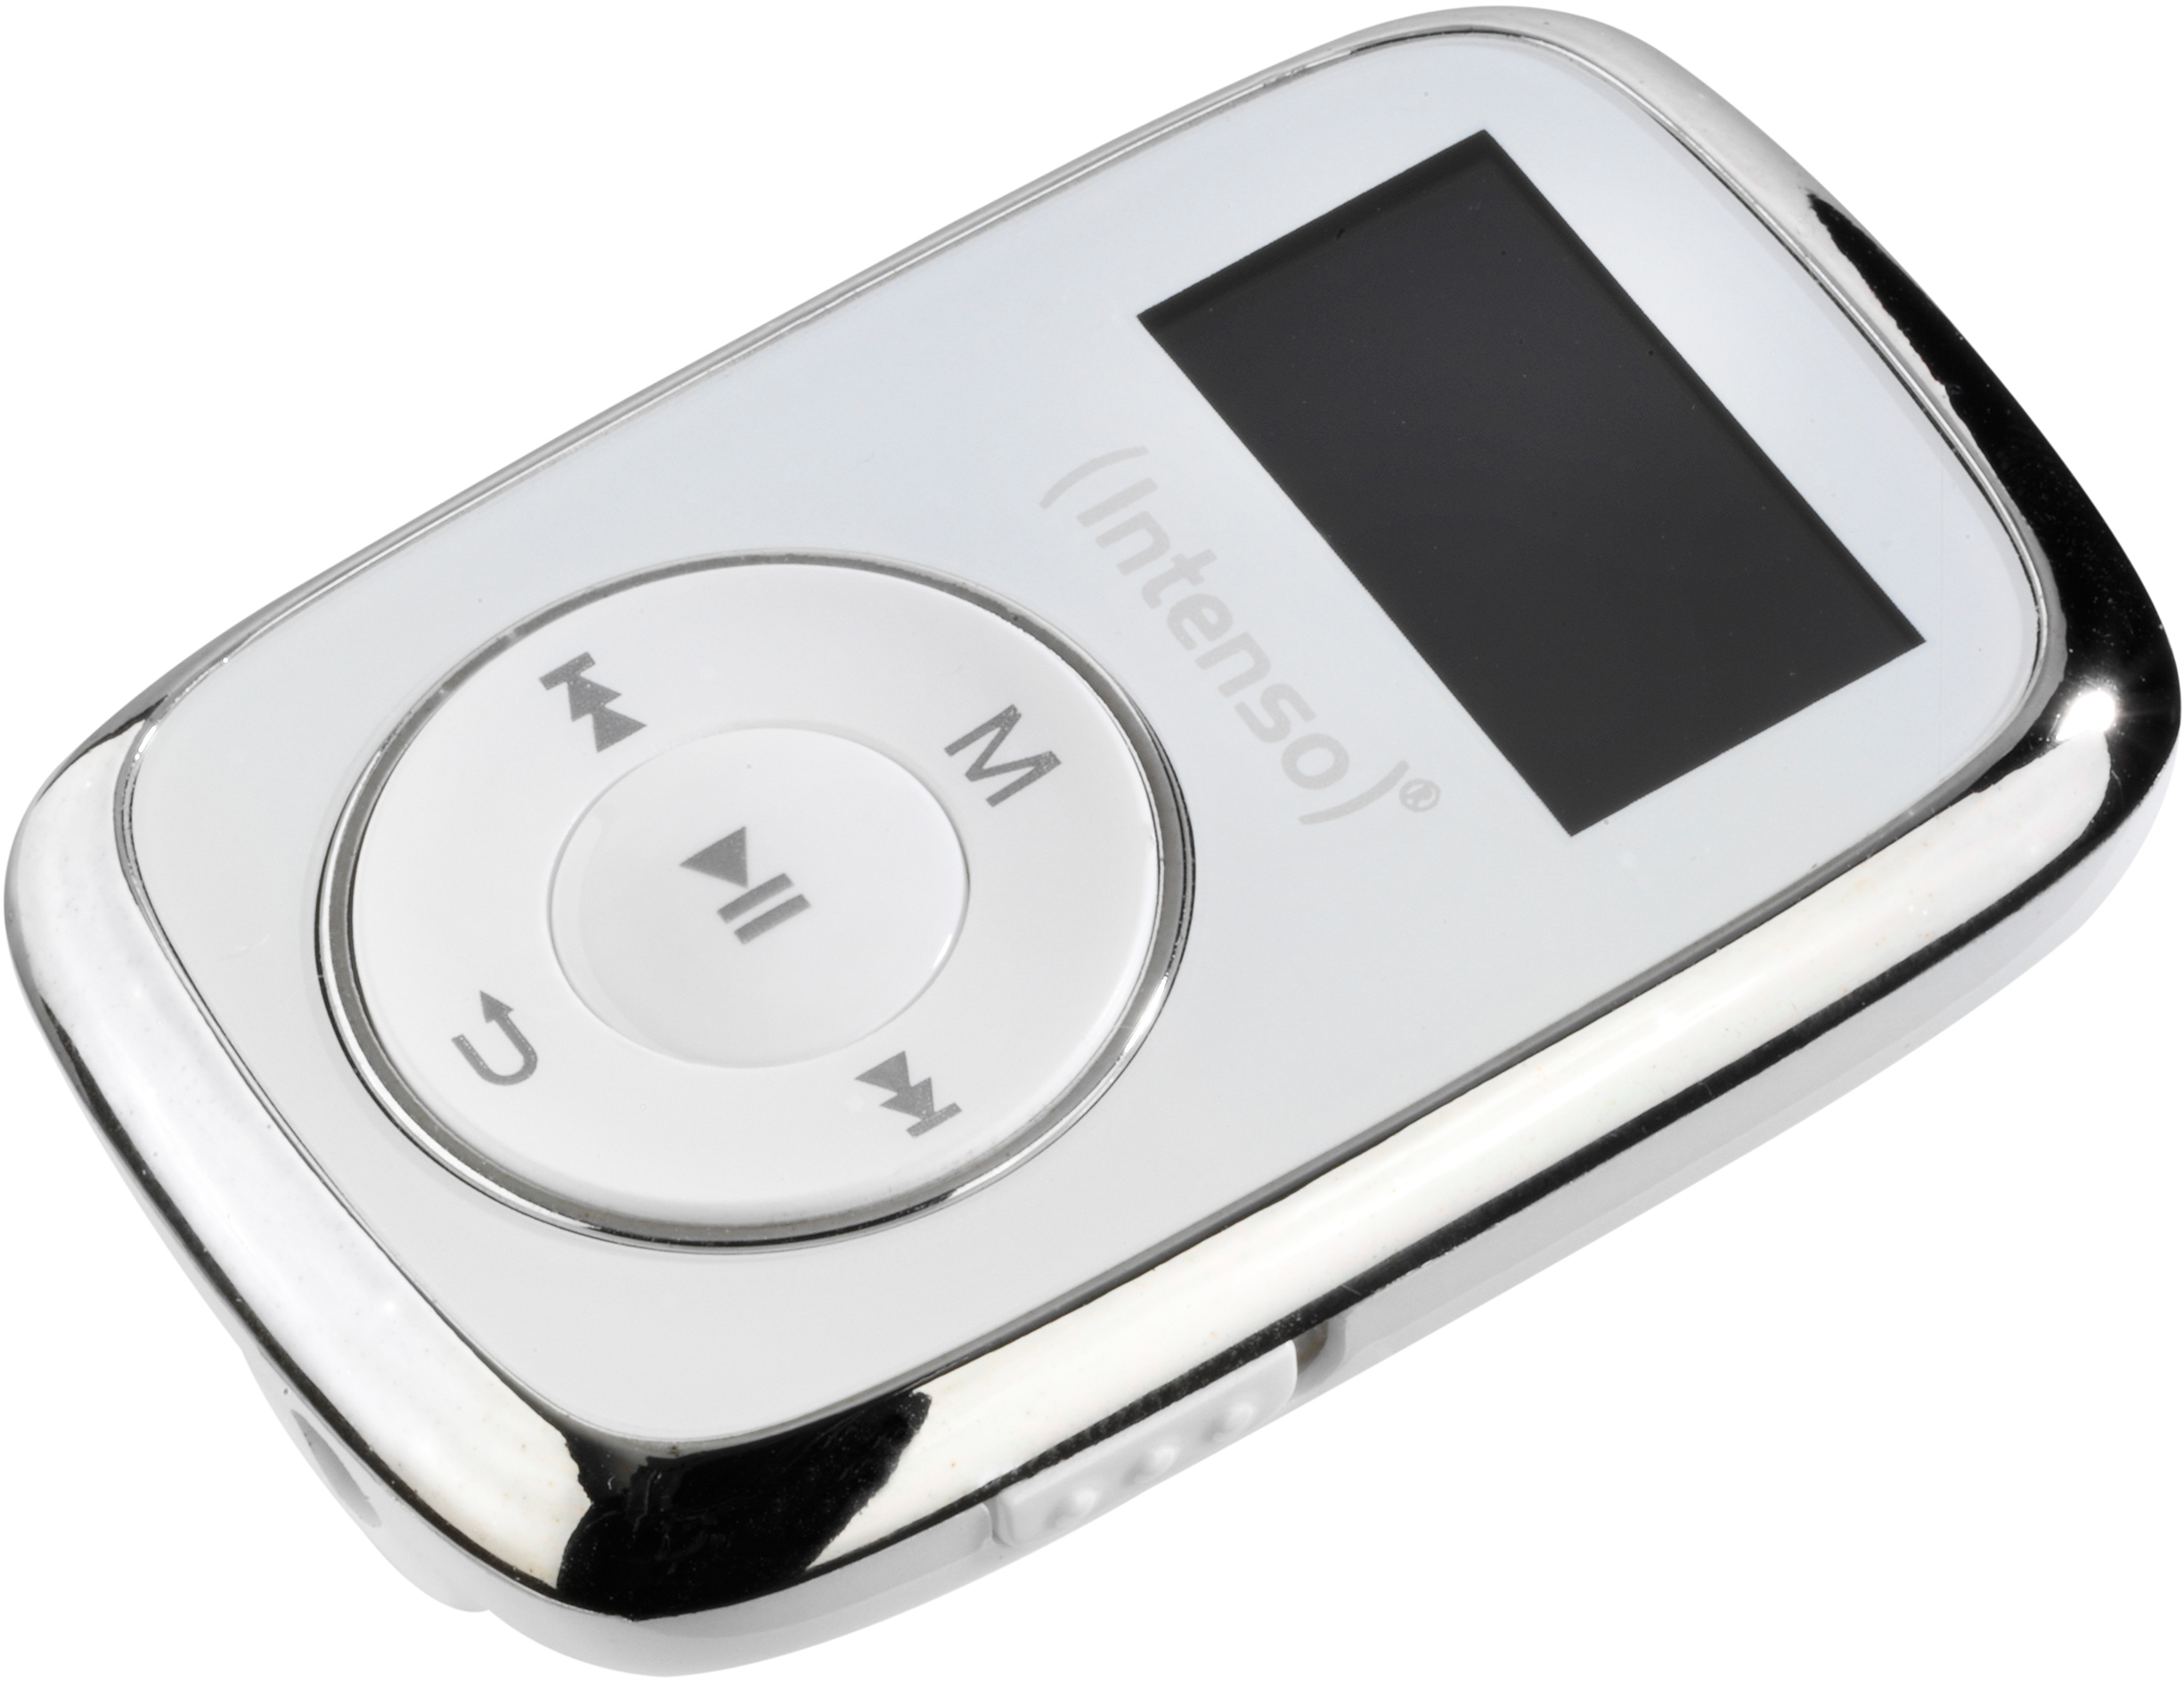 INTENSO Music Mover Mp3-Player GB, Weiß) (8